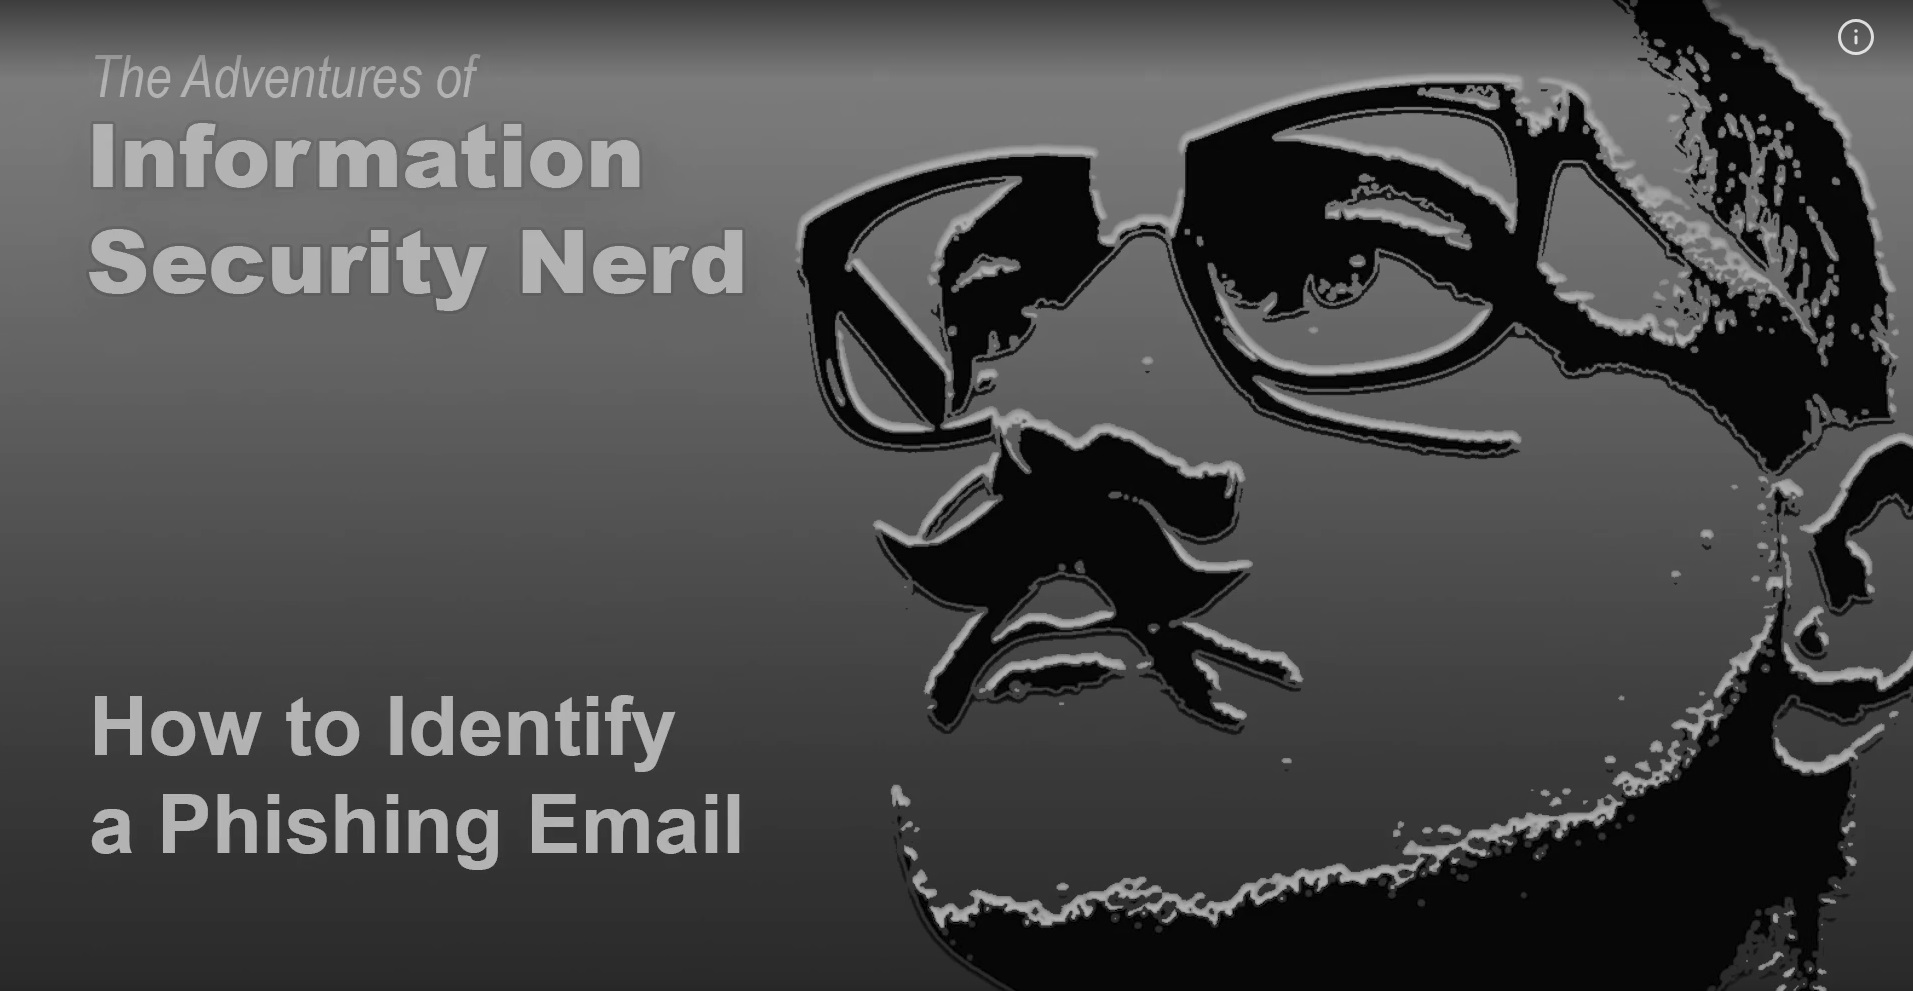 the adventures of information security nerd - how to identify a phising email